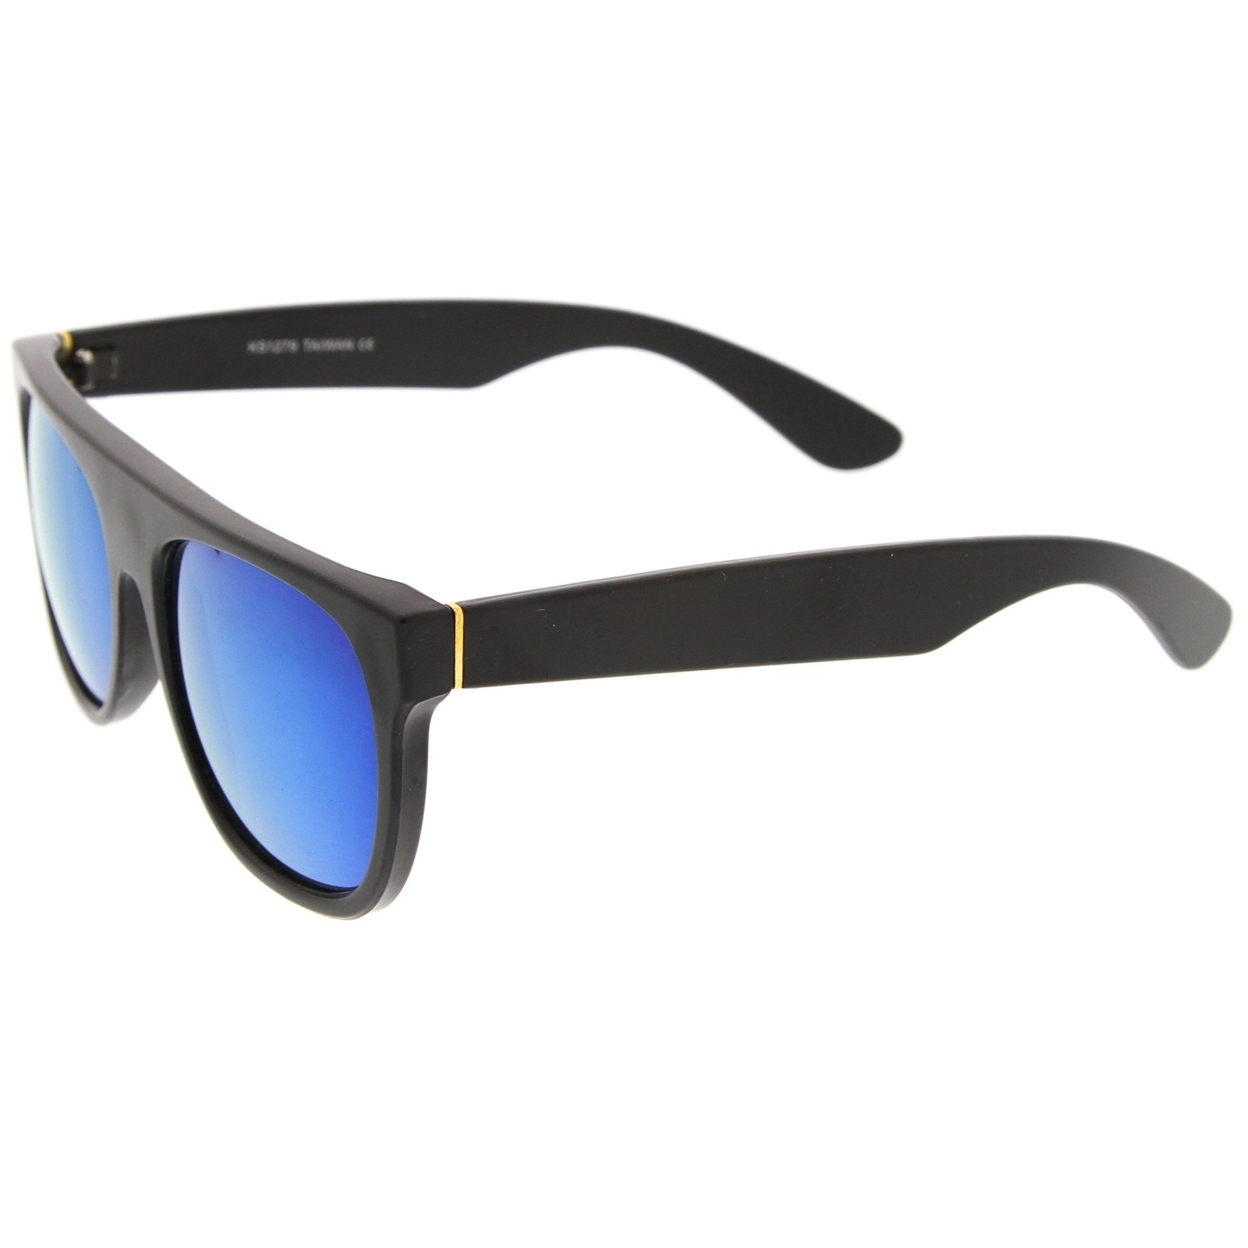 Modern Super Flat-Top Wide Temple Colored Mirror Lens Horn Rimmed Sunglasses 55mm - Shiny White / Blue Mirror